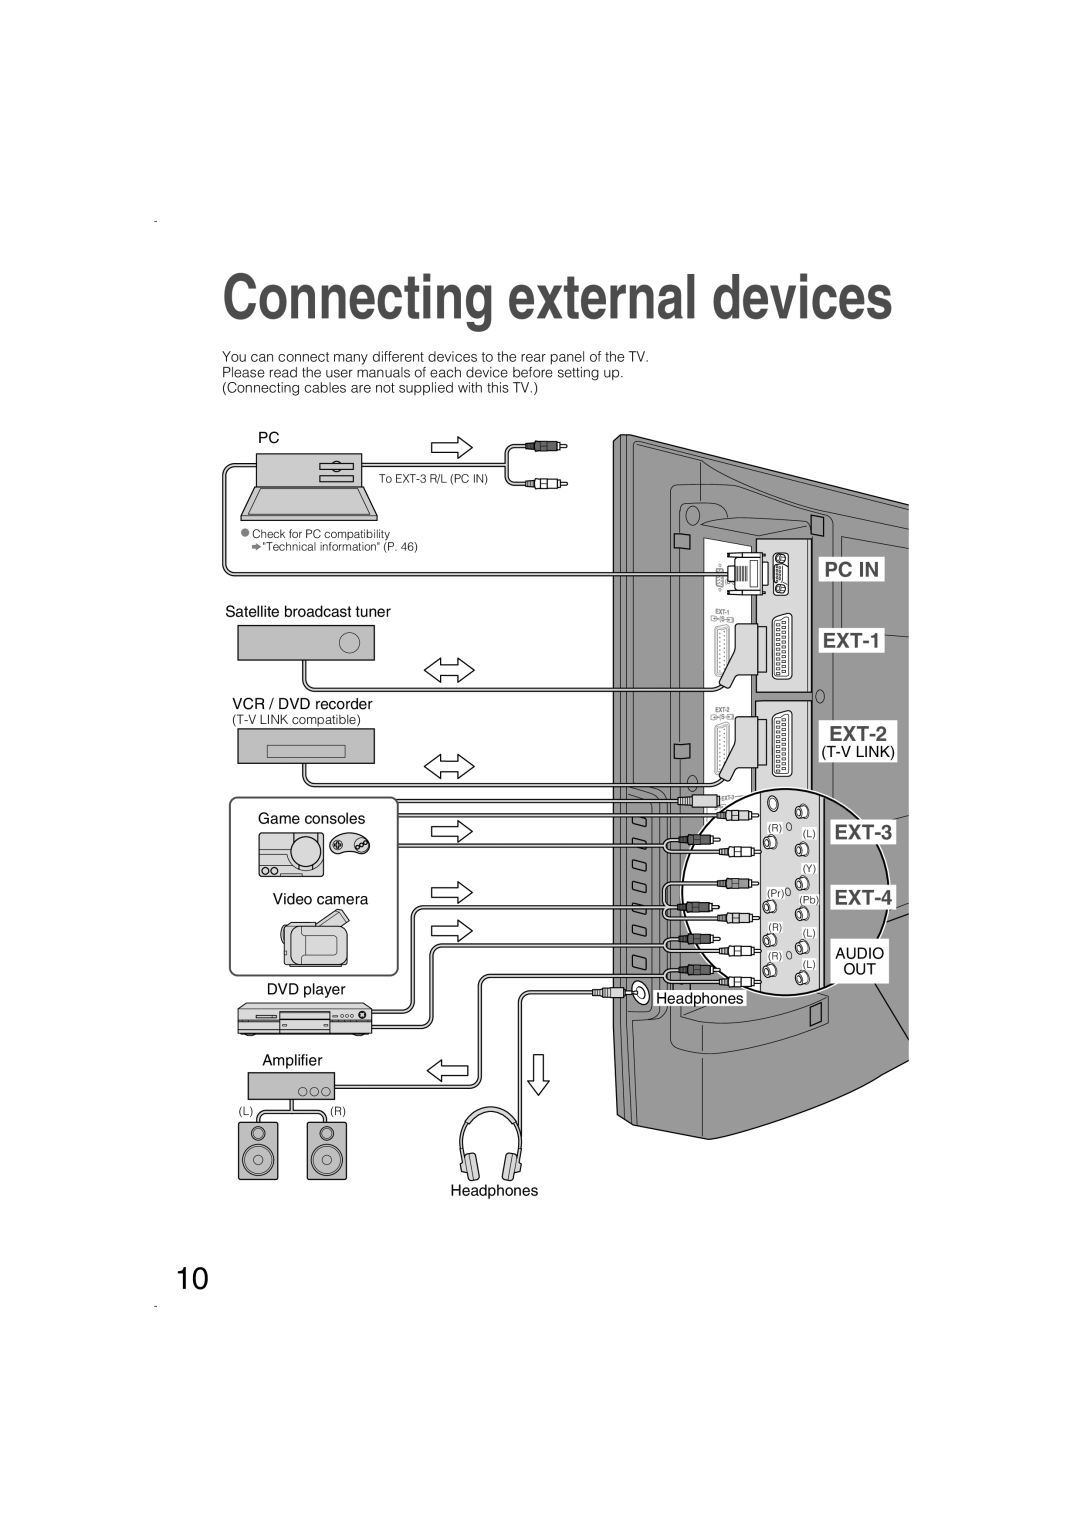 JVC LCT1847-001B-U manual PC IN EXT-1 EXT-2, EXT-3, EXT-4, Connecting external devices 